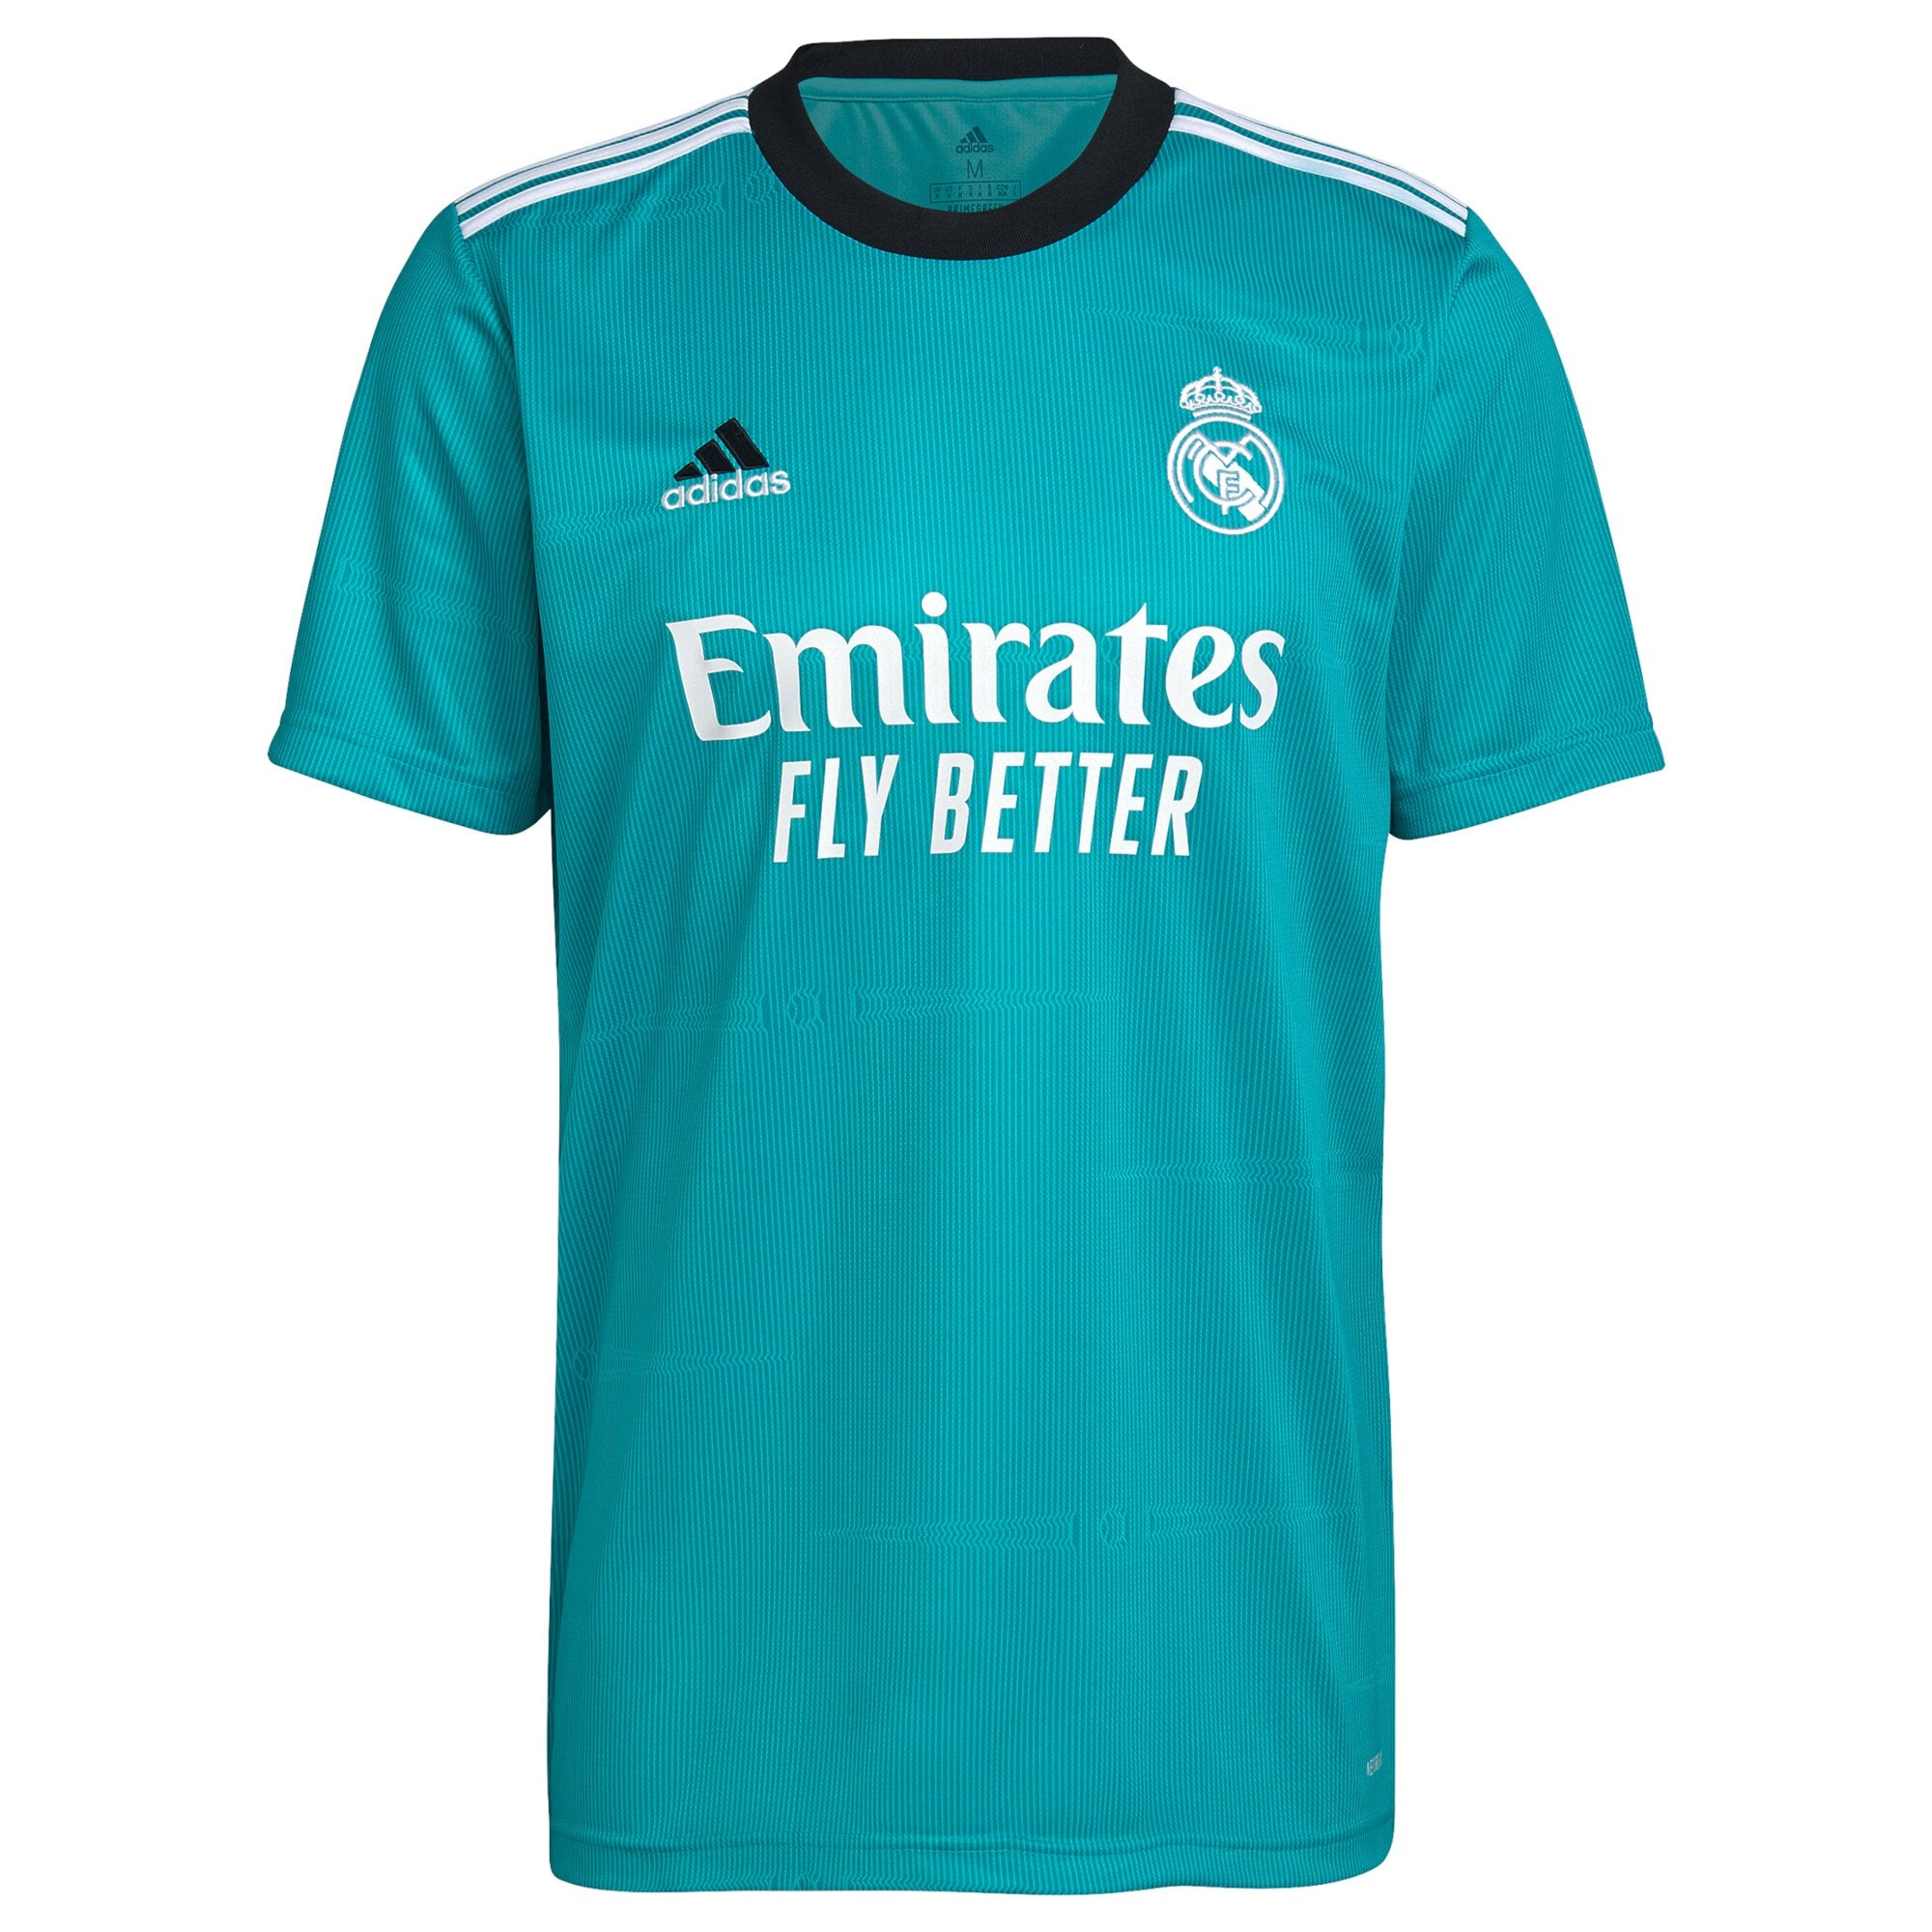 Real Madrid Third Shirt 2021-22 with Marcelo 12 printing